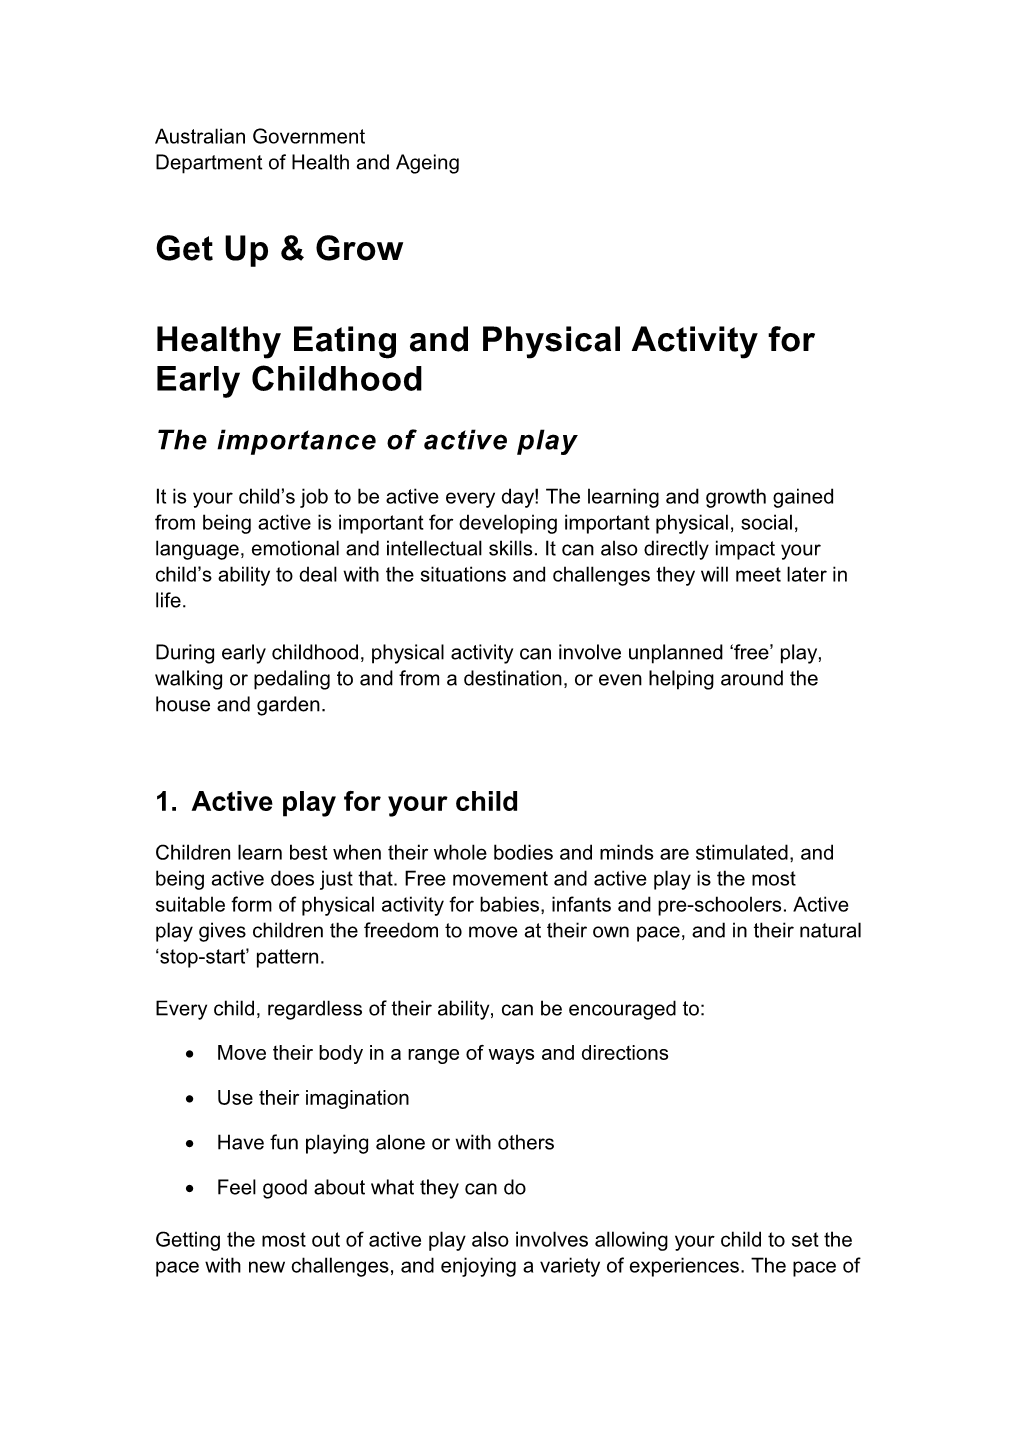 Get up and Grow - Healthy Eating and Physical Activity for Early Childhood s1